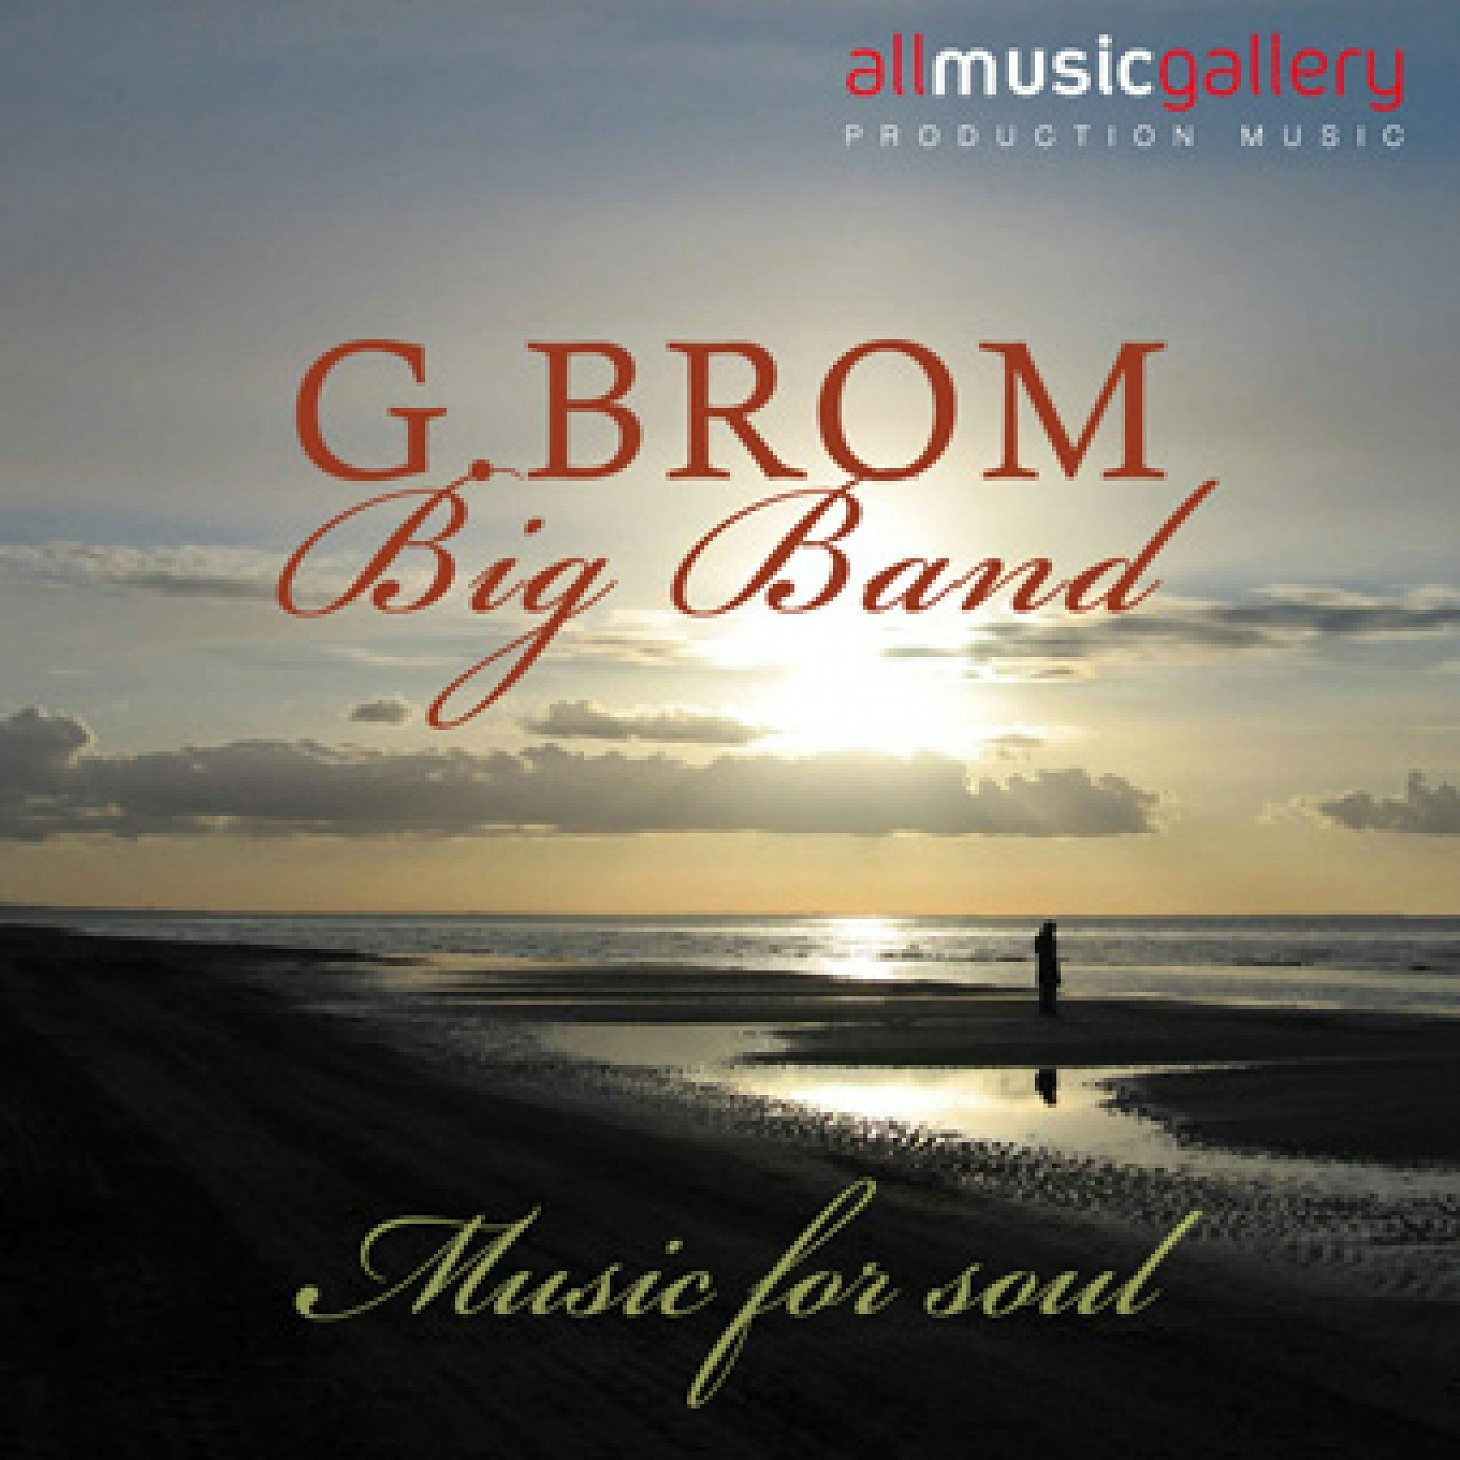 Gustav Brom Big Band - Music for the Soul